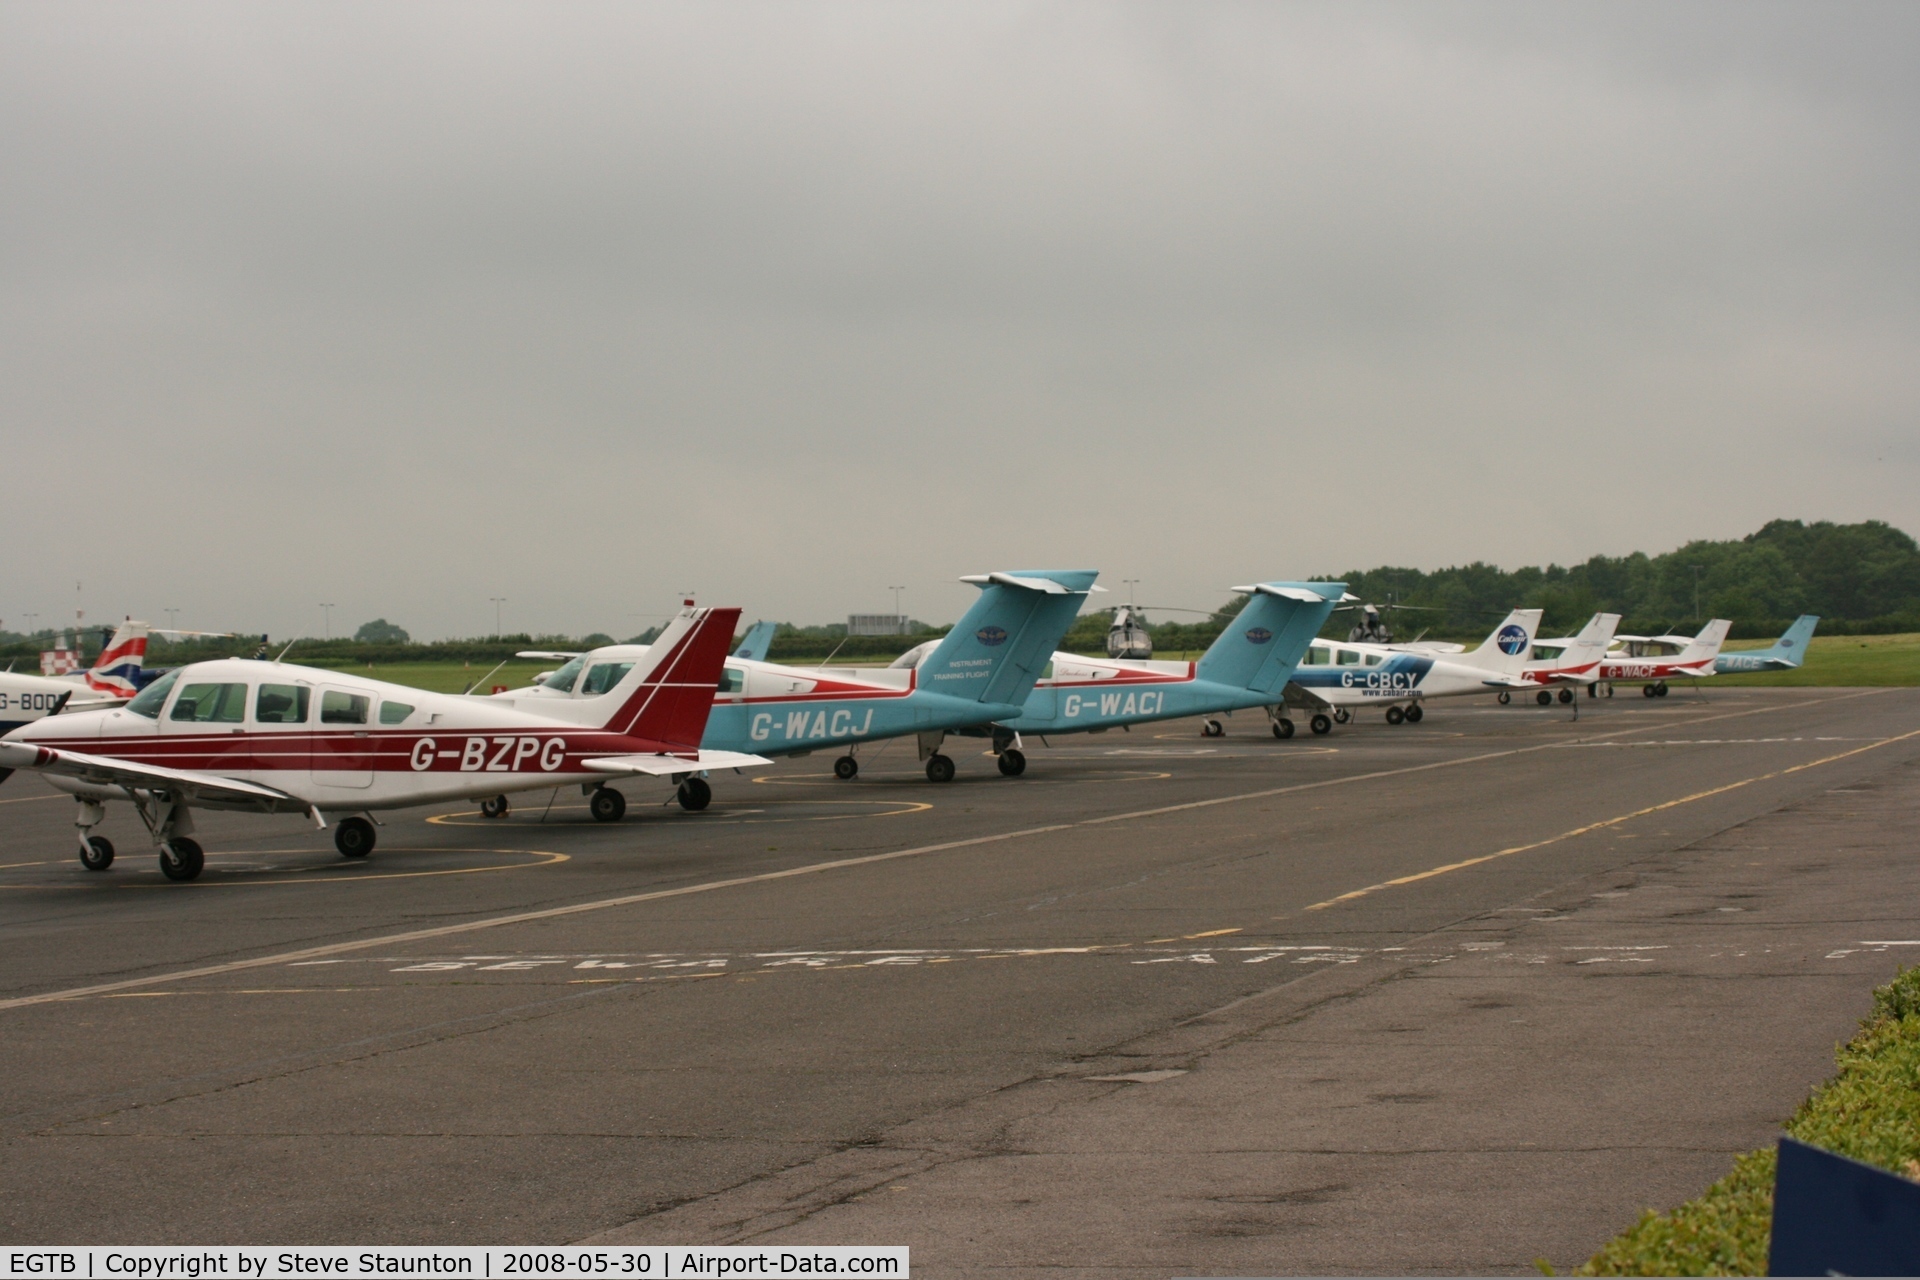 Wycombe Air Park/Booker Airport, High Wycombe, England United Kingdom (EGTB) - Taken at Wycombe Air Park using my new Sigma 50 to 500 APO DG HSM lens (The Beast)